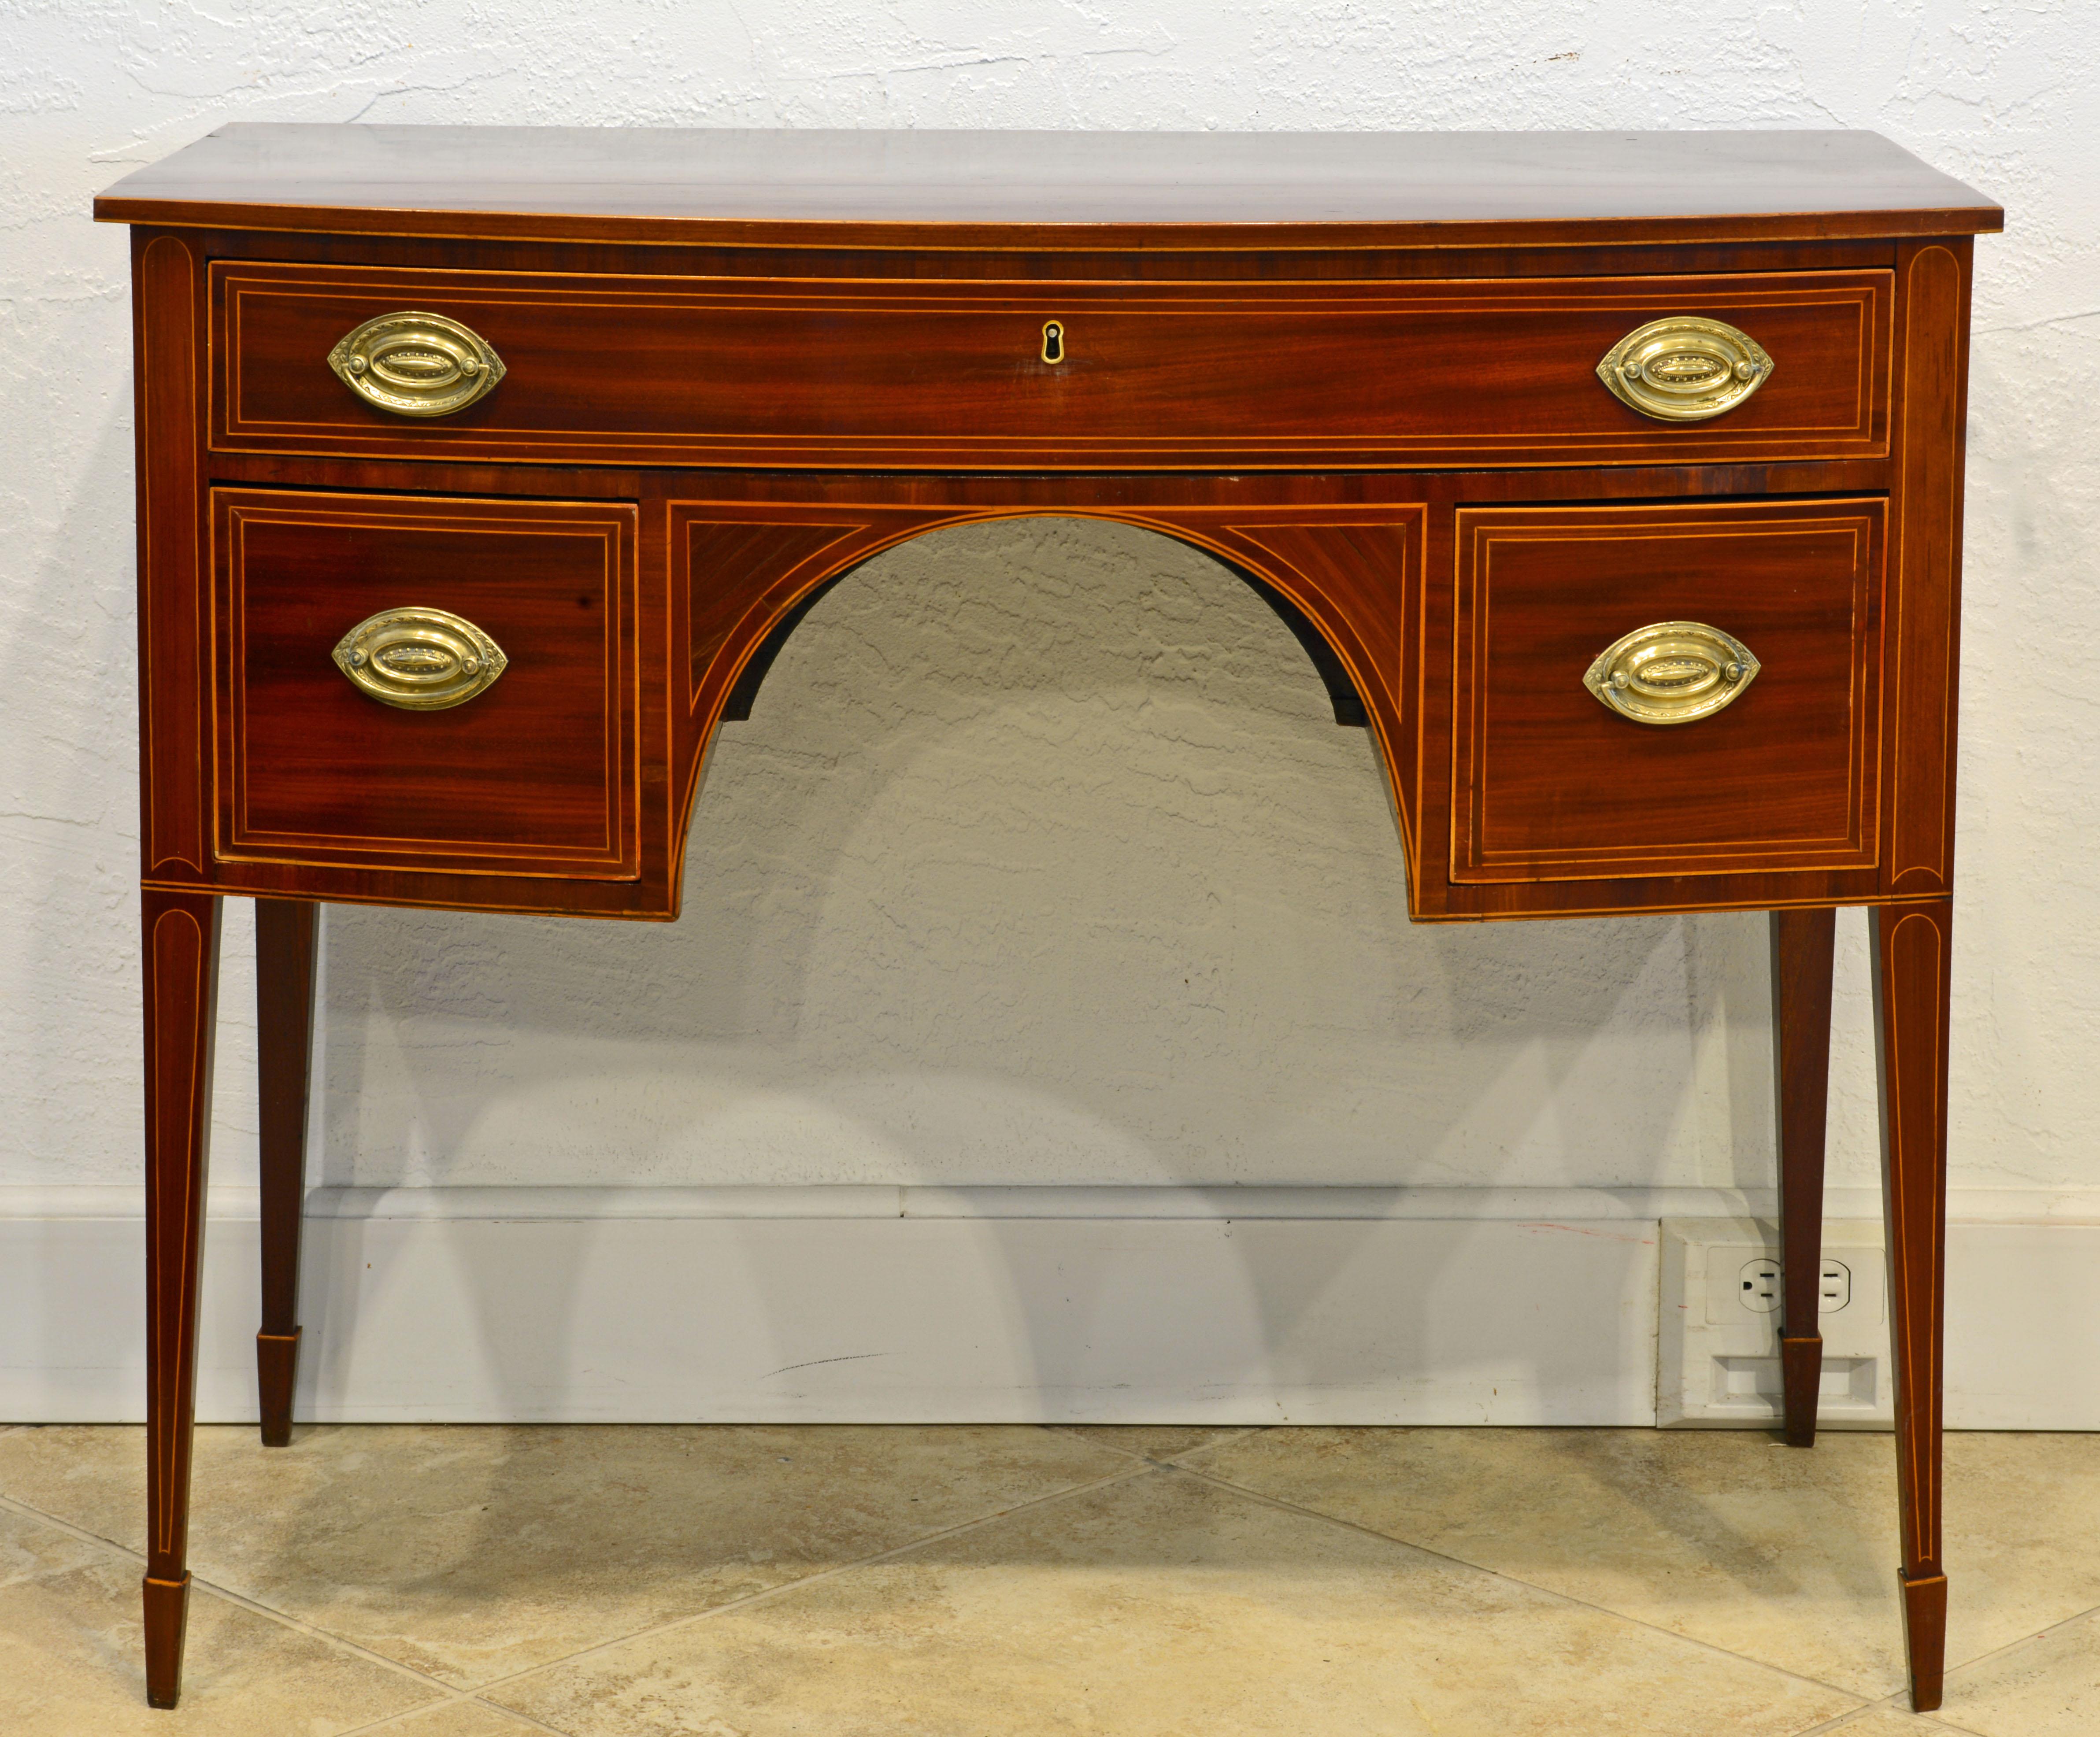 This superior Gerogian bowfront writing desk features a one piece polished satinwood stringed mahogany top above a body with a long drawer and two short deep drawers flanking a semi circular knee hole. The desk rest on four slightly splayed square